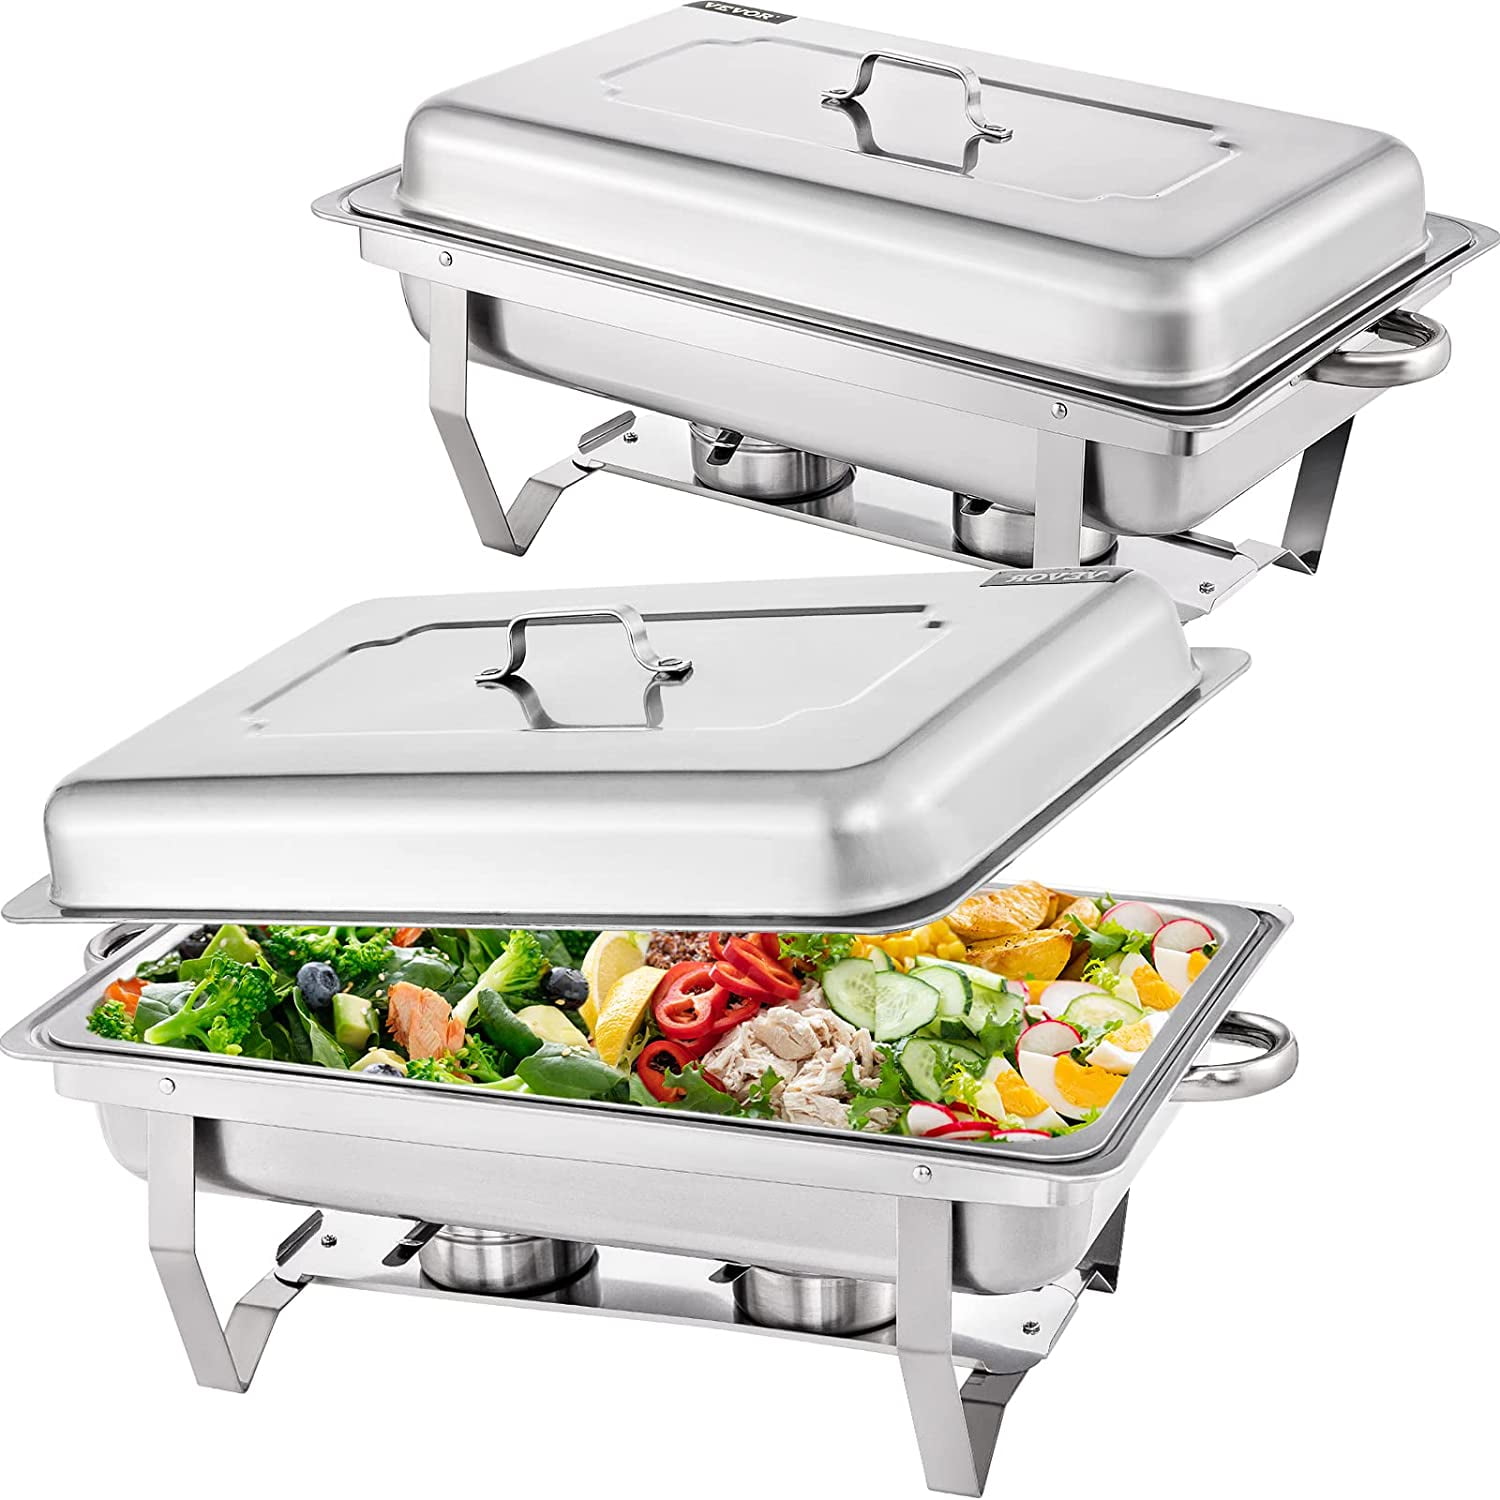 2 Pack Rectangular Stainless Steel Chafer Chafing Dish 9L 8QT 1/2 Size Buffet US 